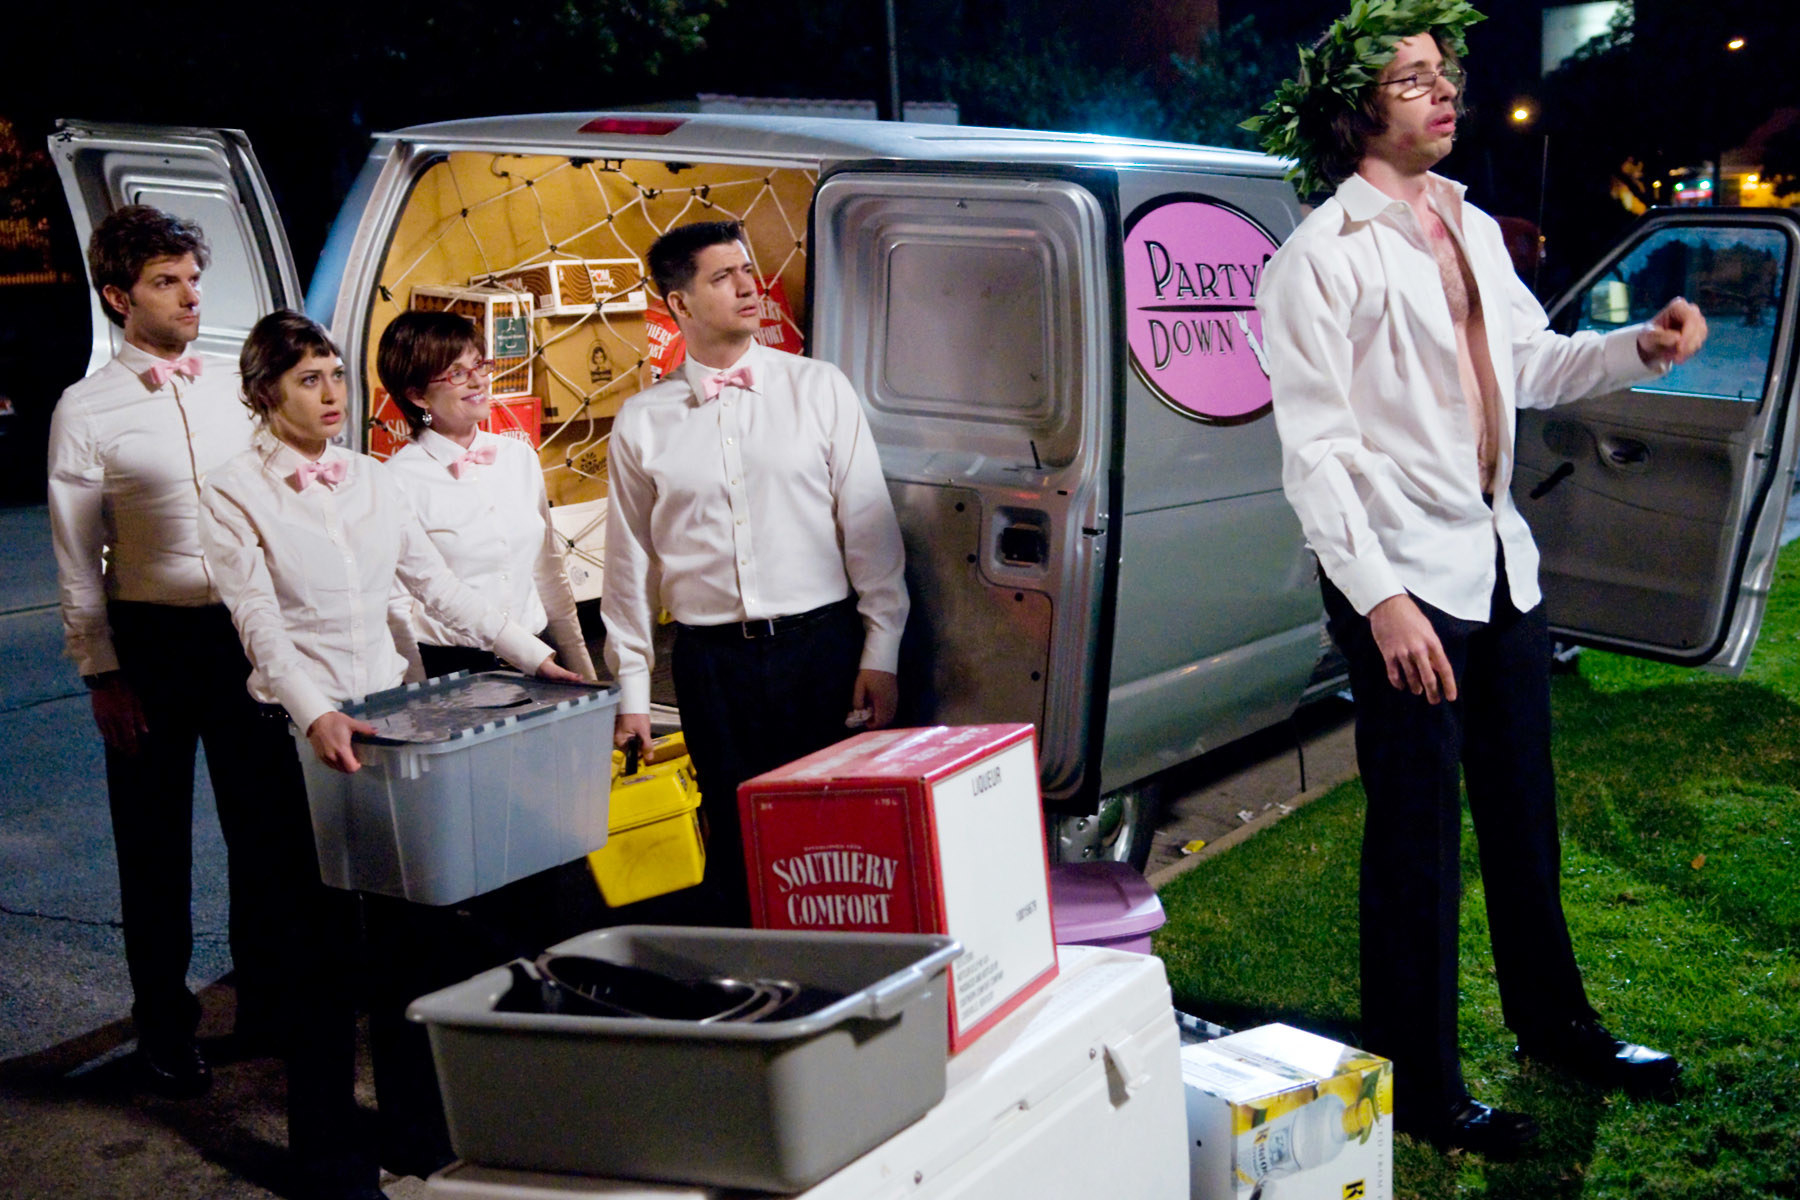 PARTY DOWN, (from left): Adam Scott, Lizzy Caplan, Megan Mullally, Ken Marino, Martin Starr, &#x27;Not On Your Wife Opening Night&#x27;, (Season 2, ep. 206, aired May 28, 2010), 2009-2010